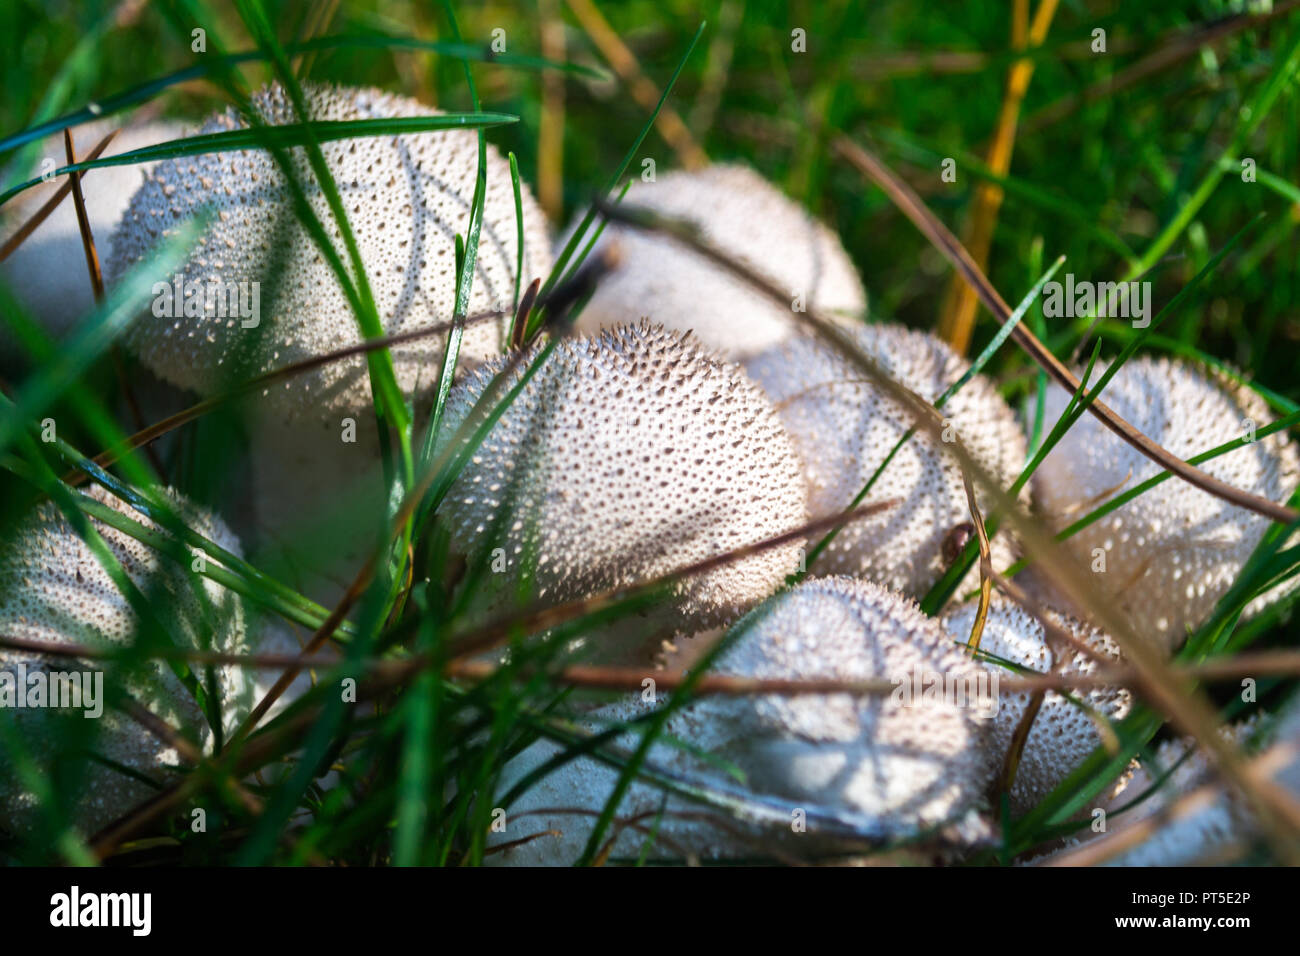 A bunch of white speckled mushrooms viewed through green autumnal grass Stock Photo